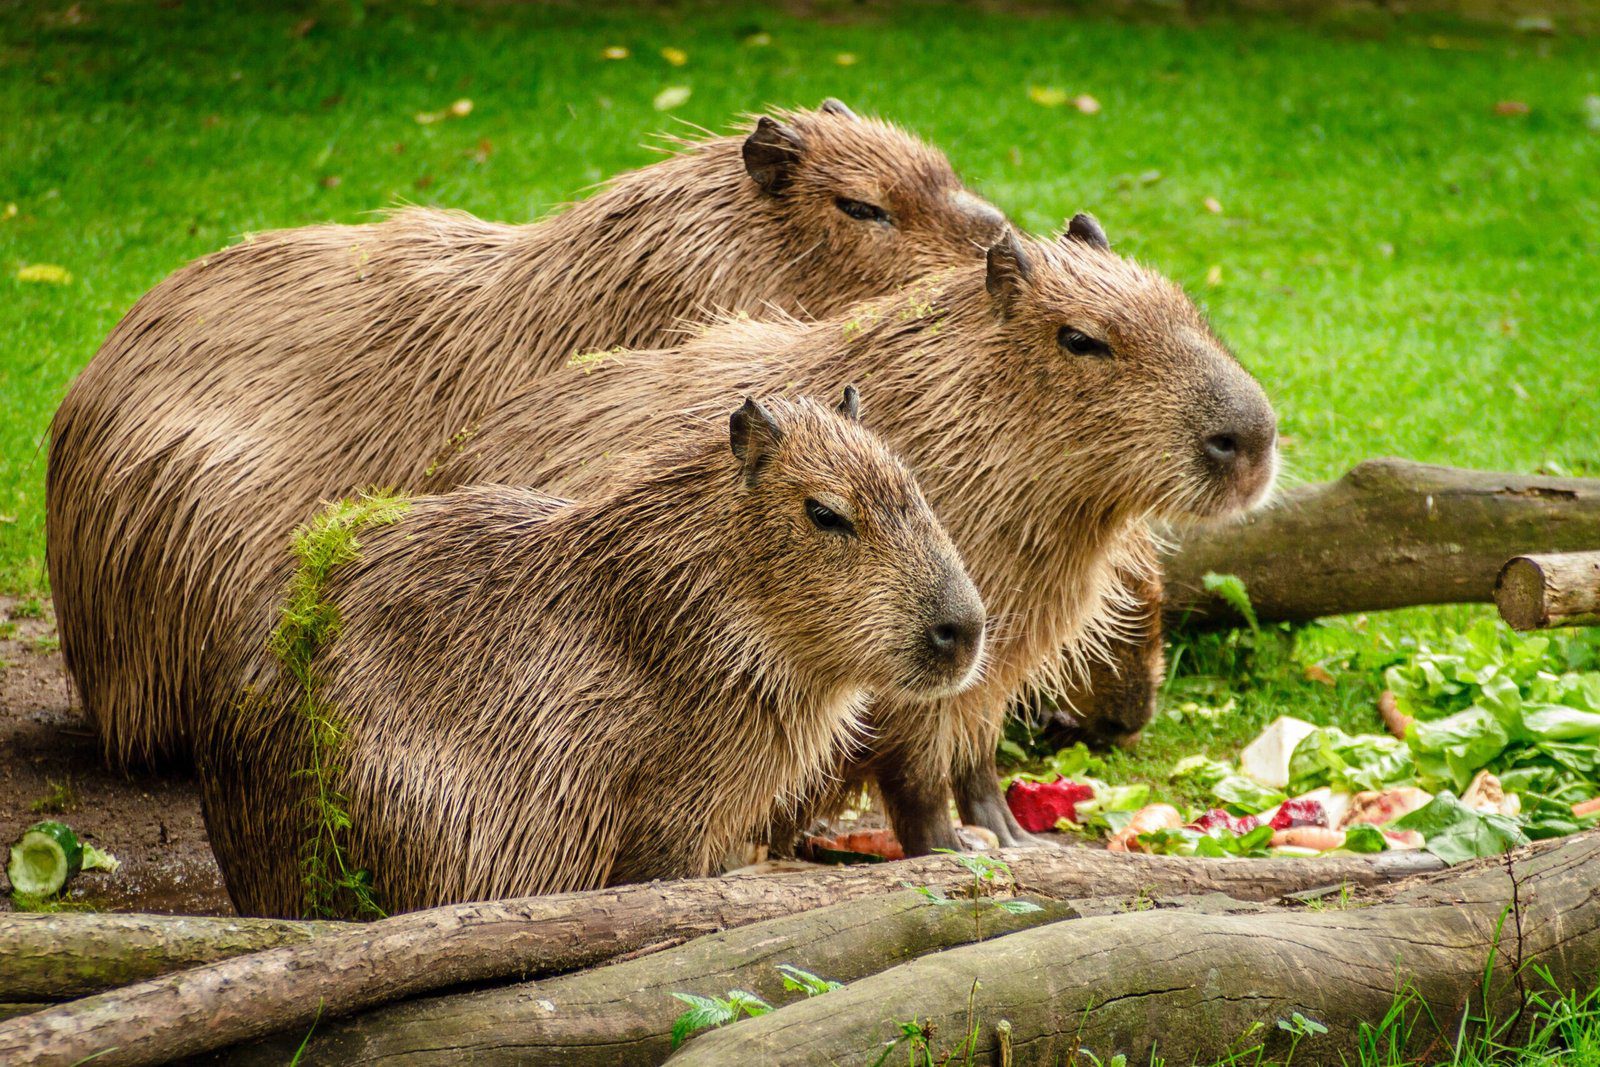 Exploring the Cotswold Wildlife Park with Capybaras